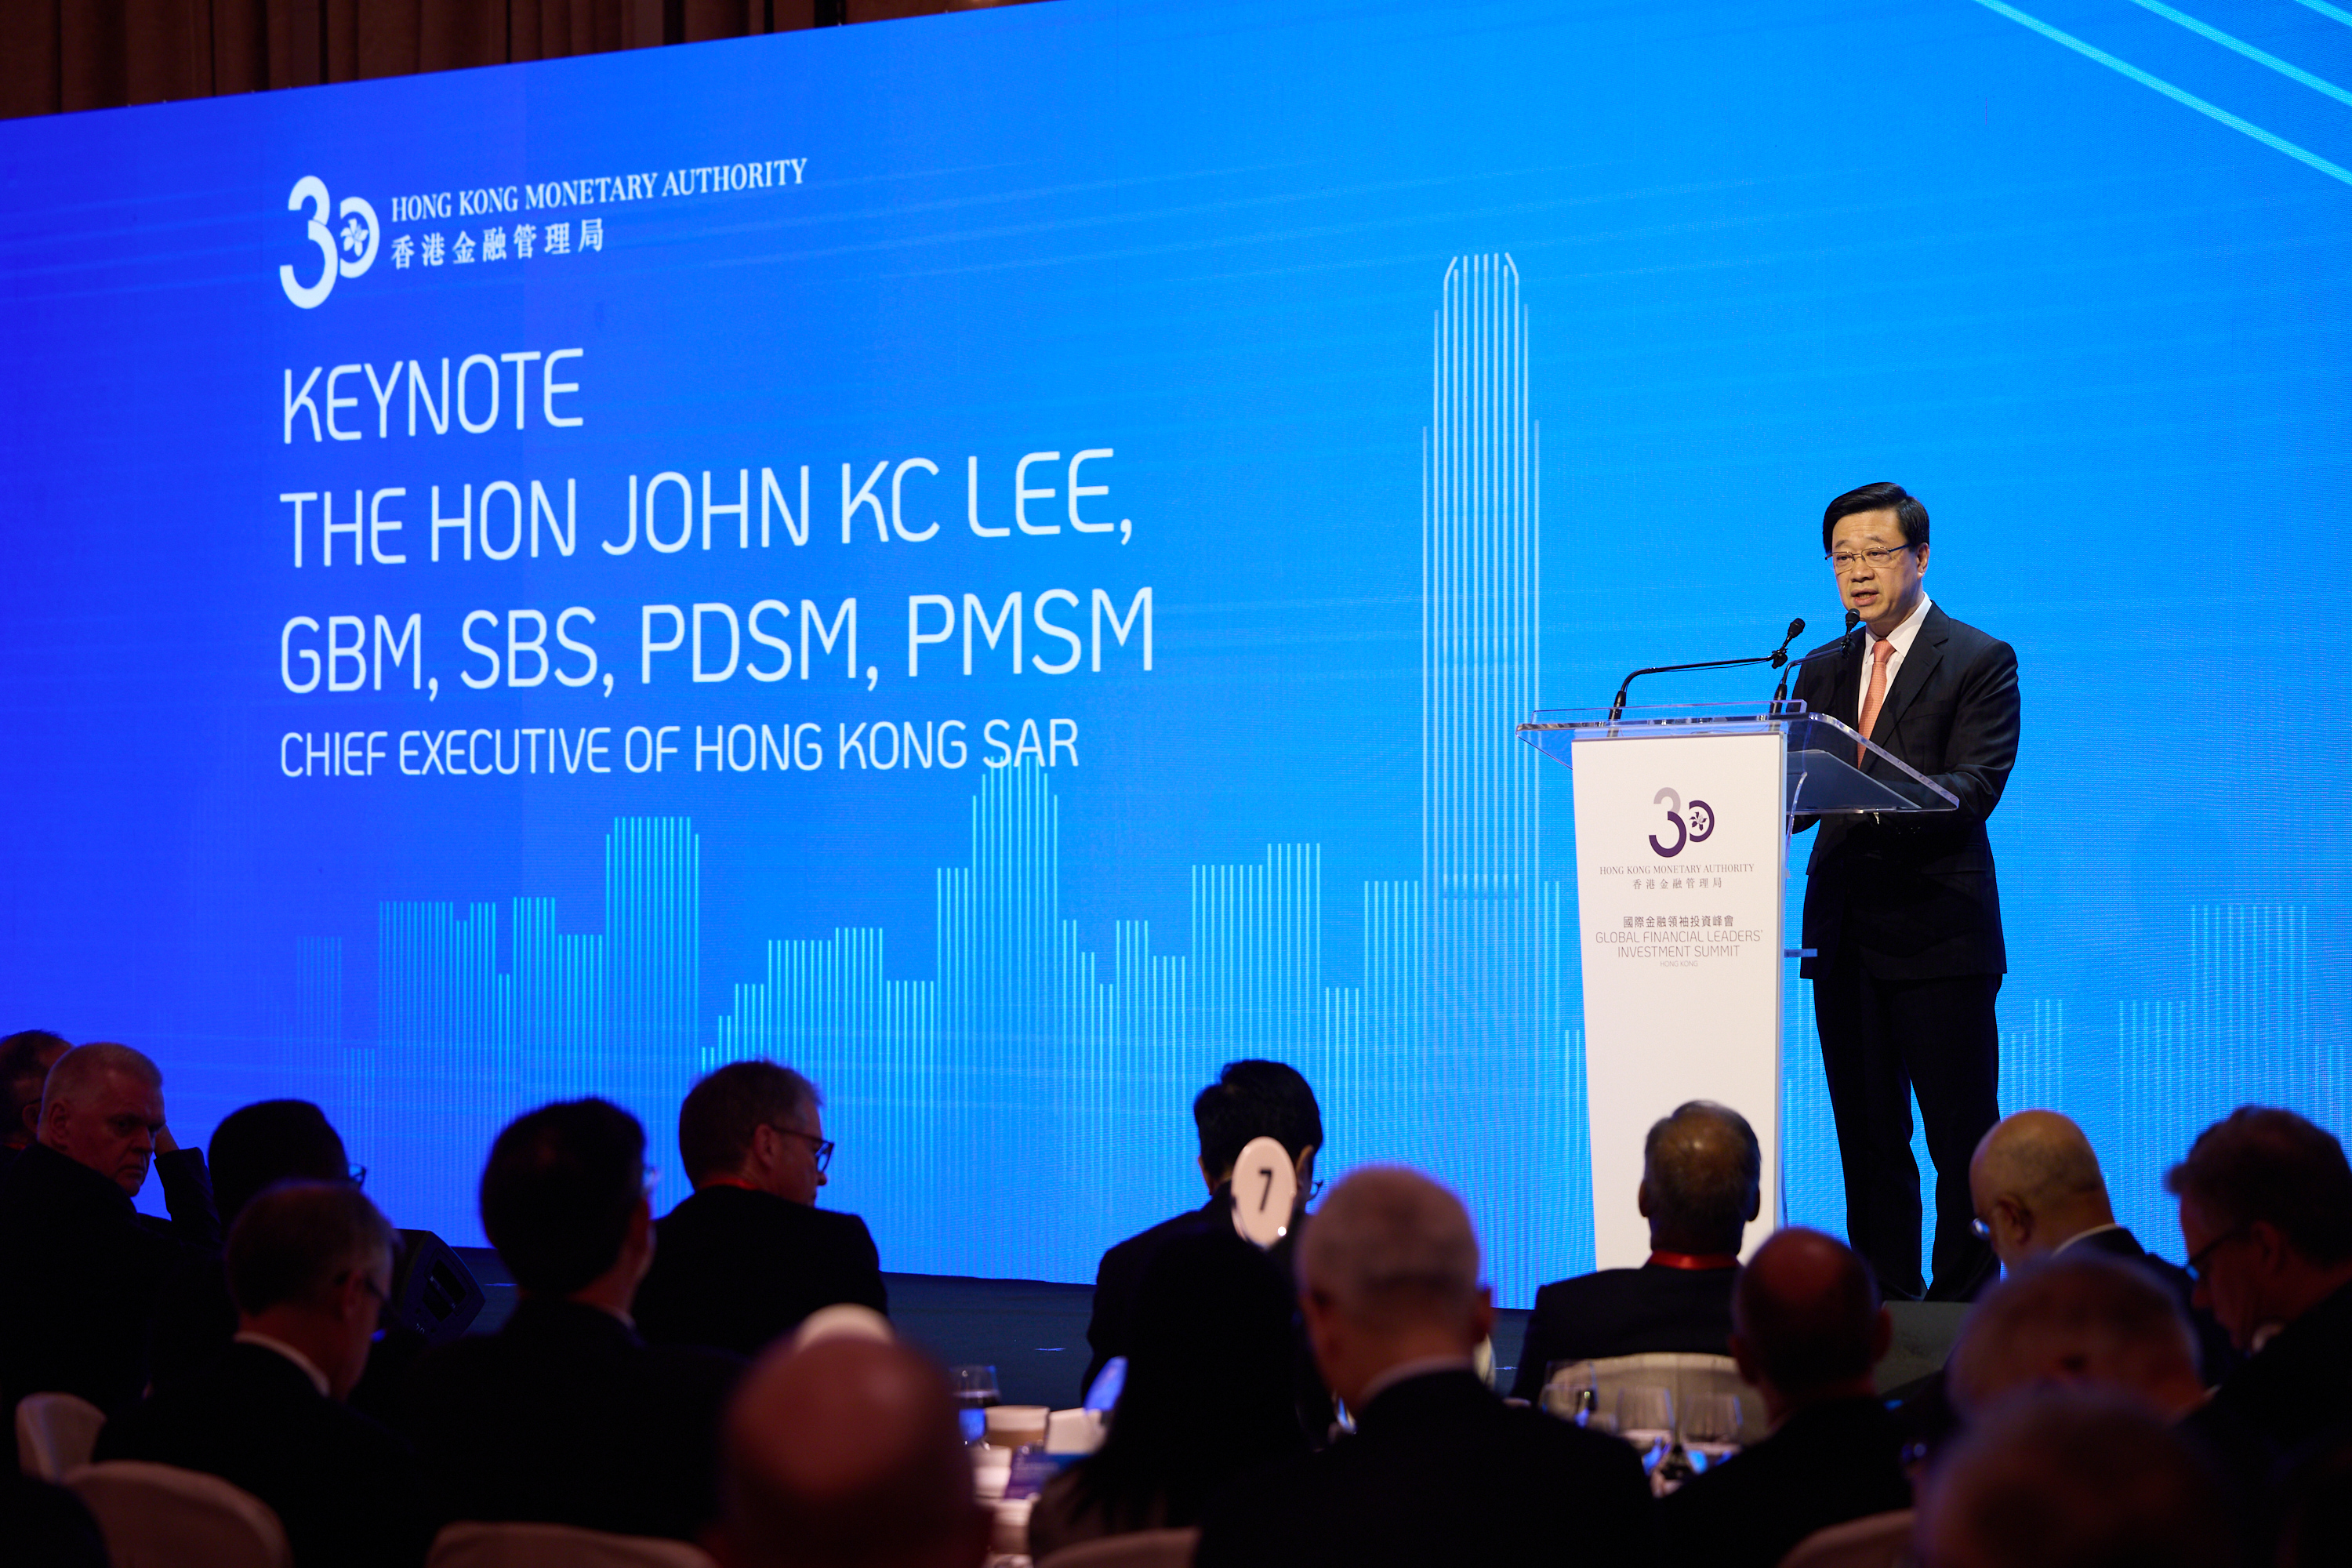 Mr John KC Lee, Chief Executive of Hong Kong SAR, delivers the keynote speech at the Global Financial Leaders’ Investment Summit on 7 November.